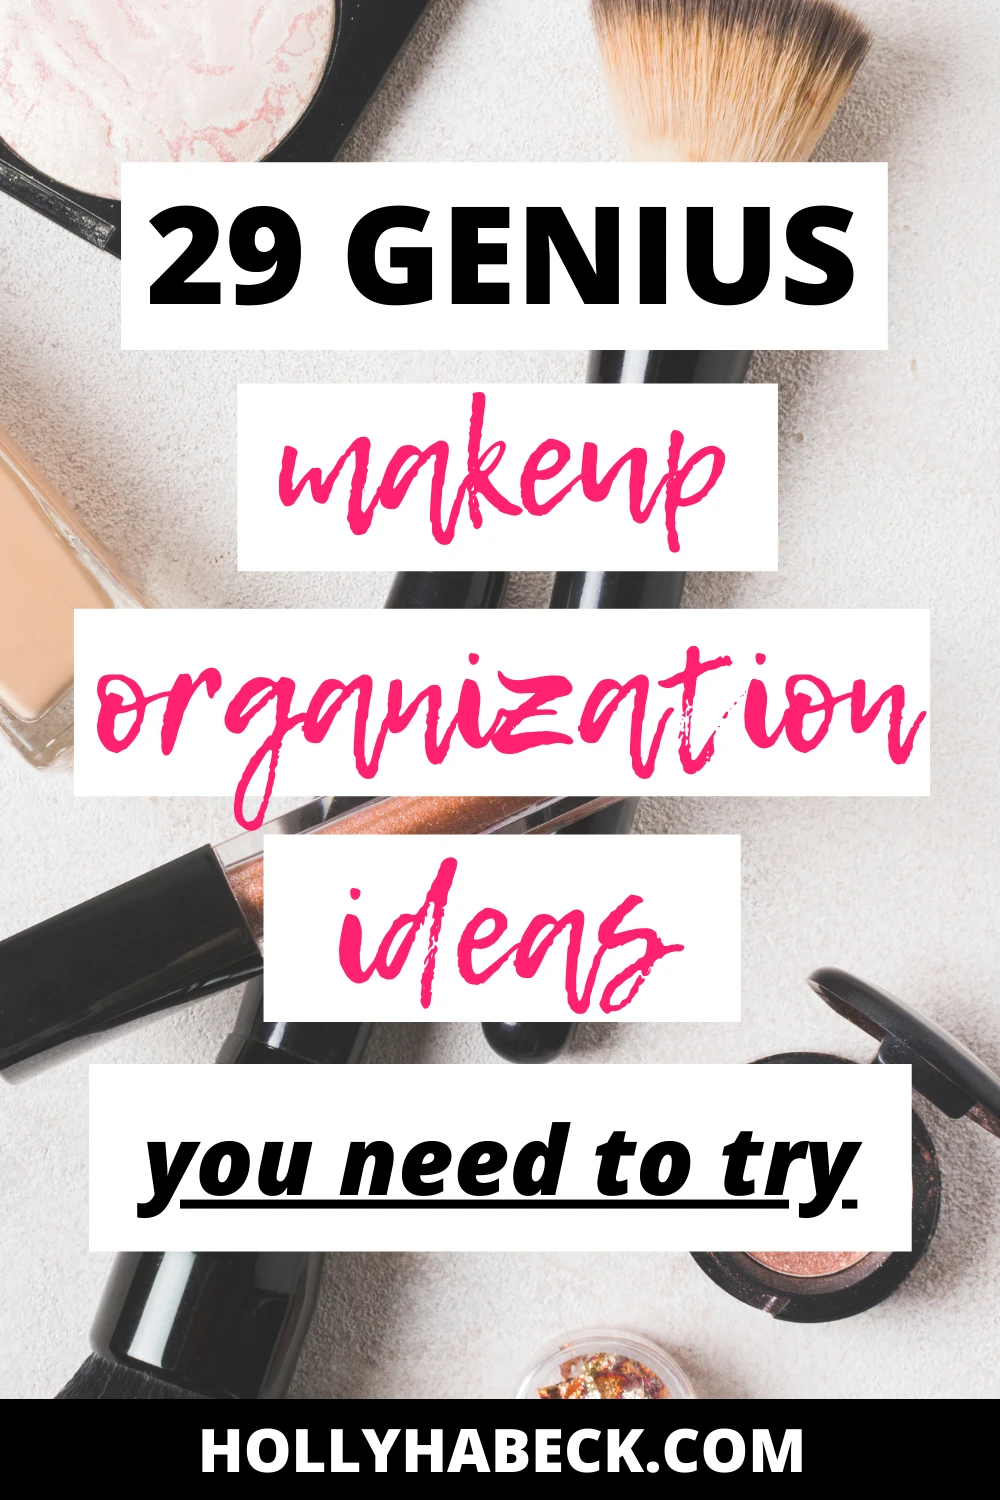 29 Genius Makeup Organization Ideas You Need to Try